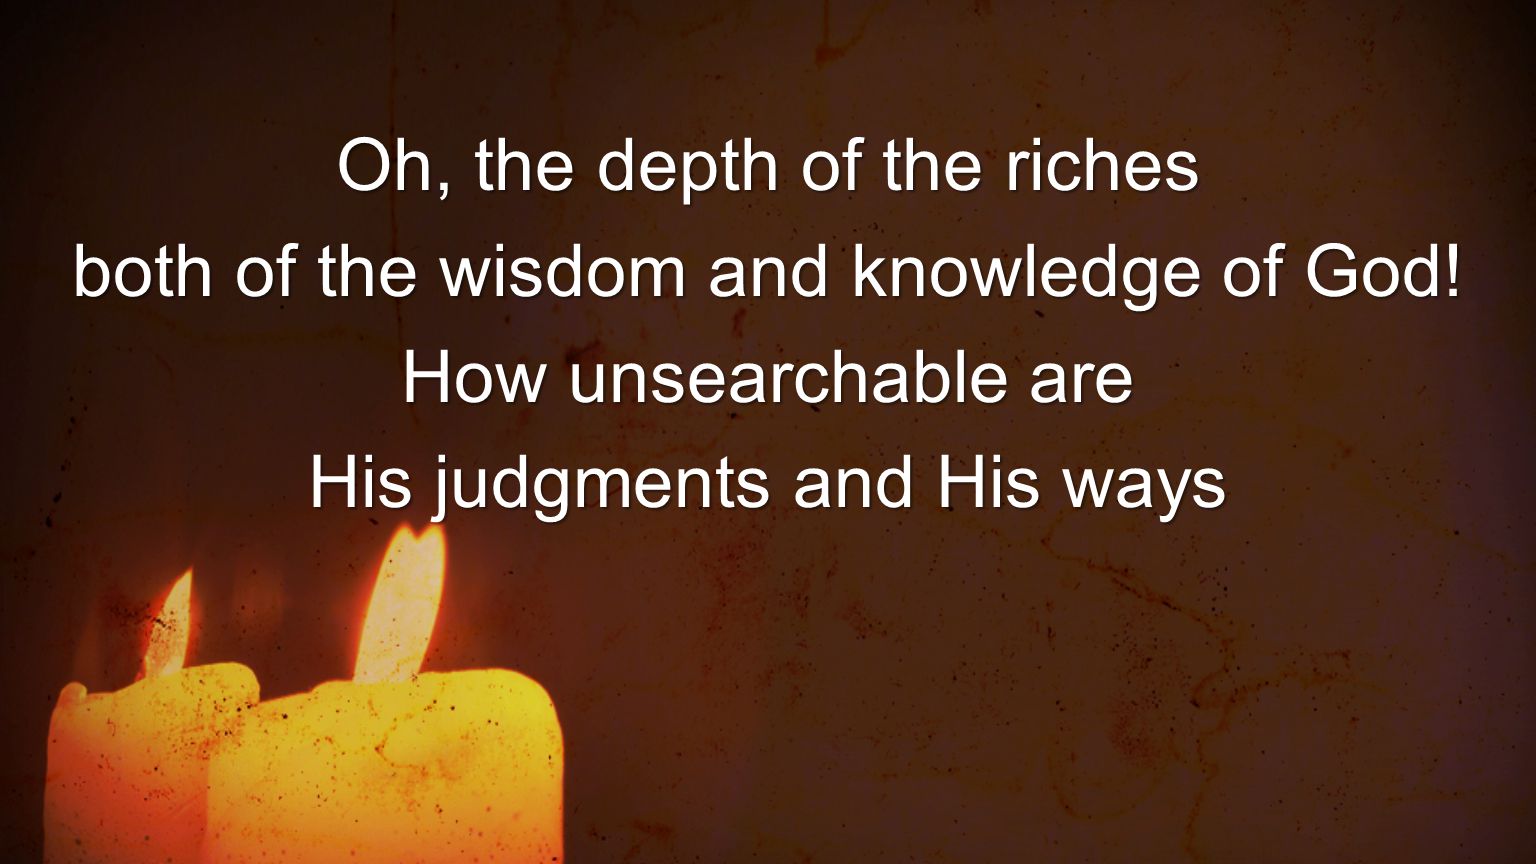 Oh, the depth of the riches both of the wisdom and knowledge of God!